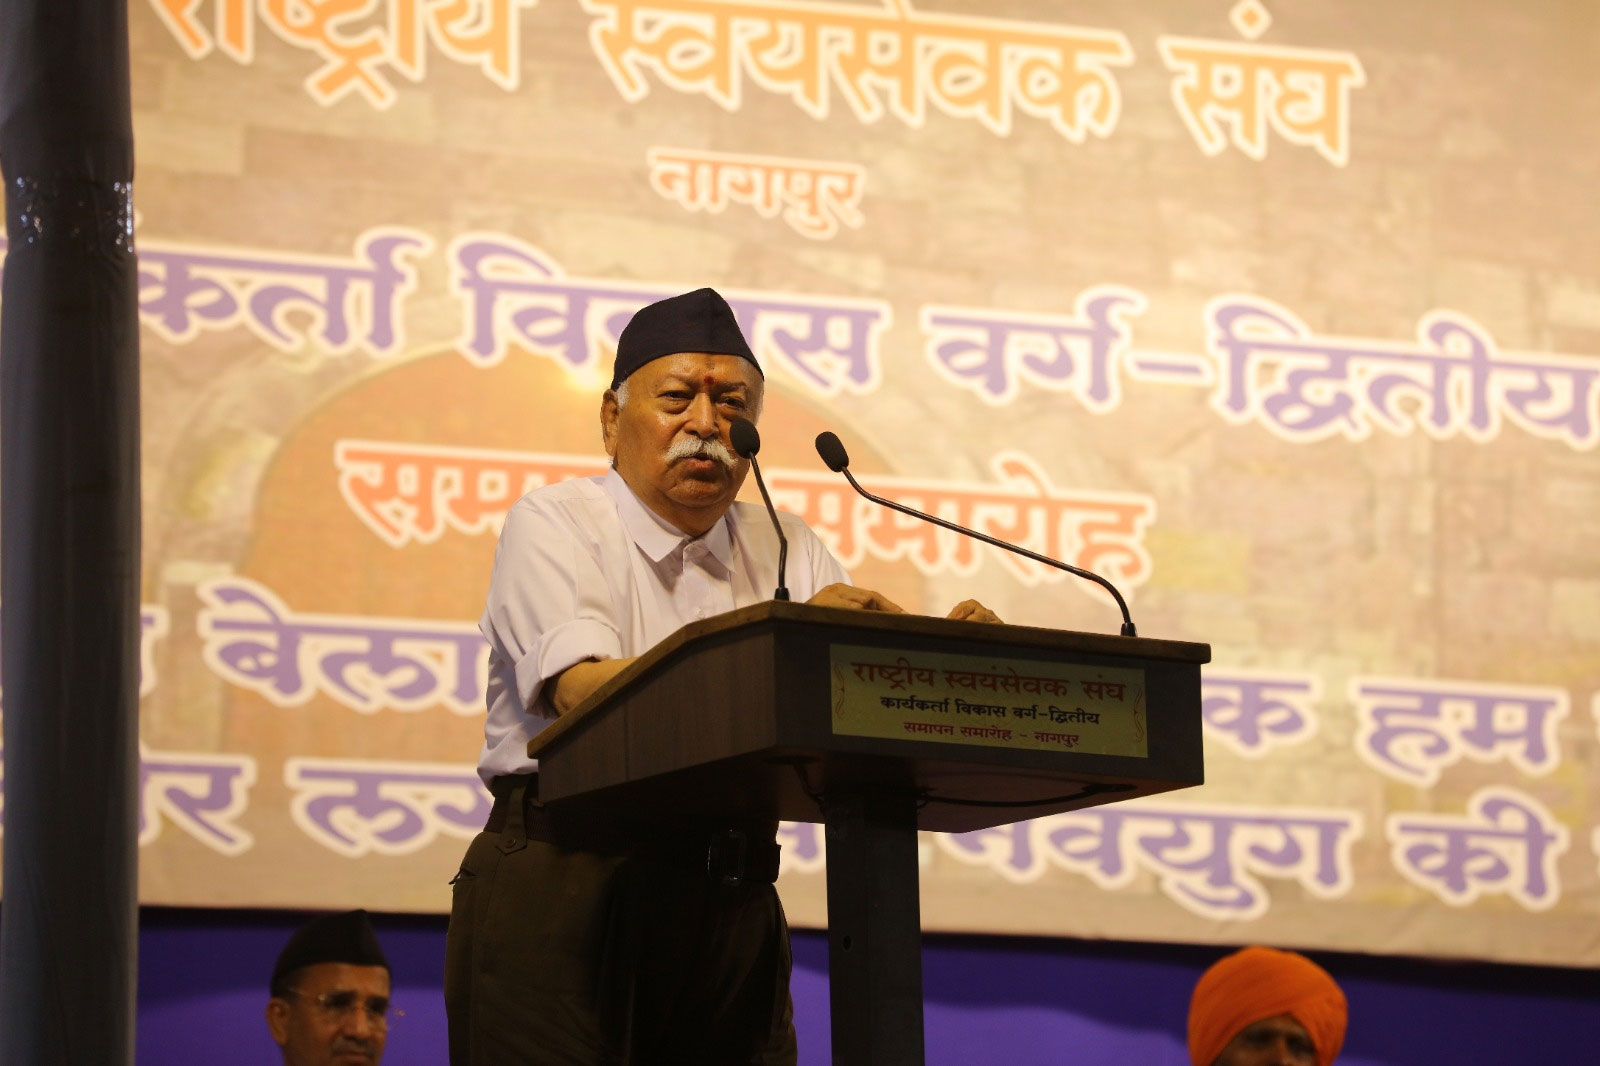  RSS Chief Mohan Bhagwat Statement On Manipur Violence and Election